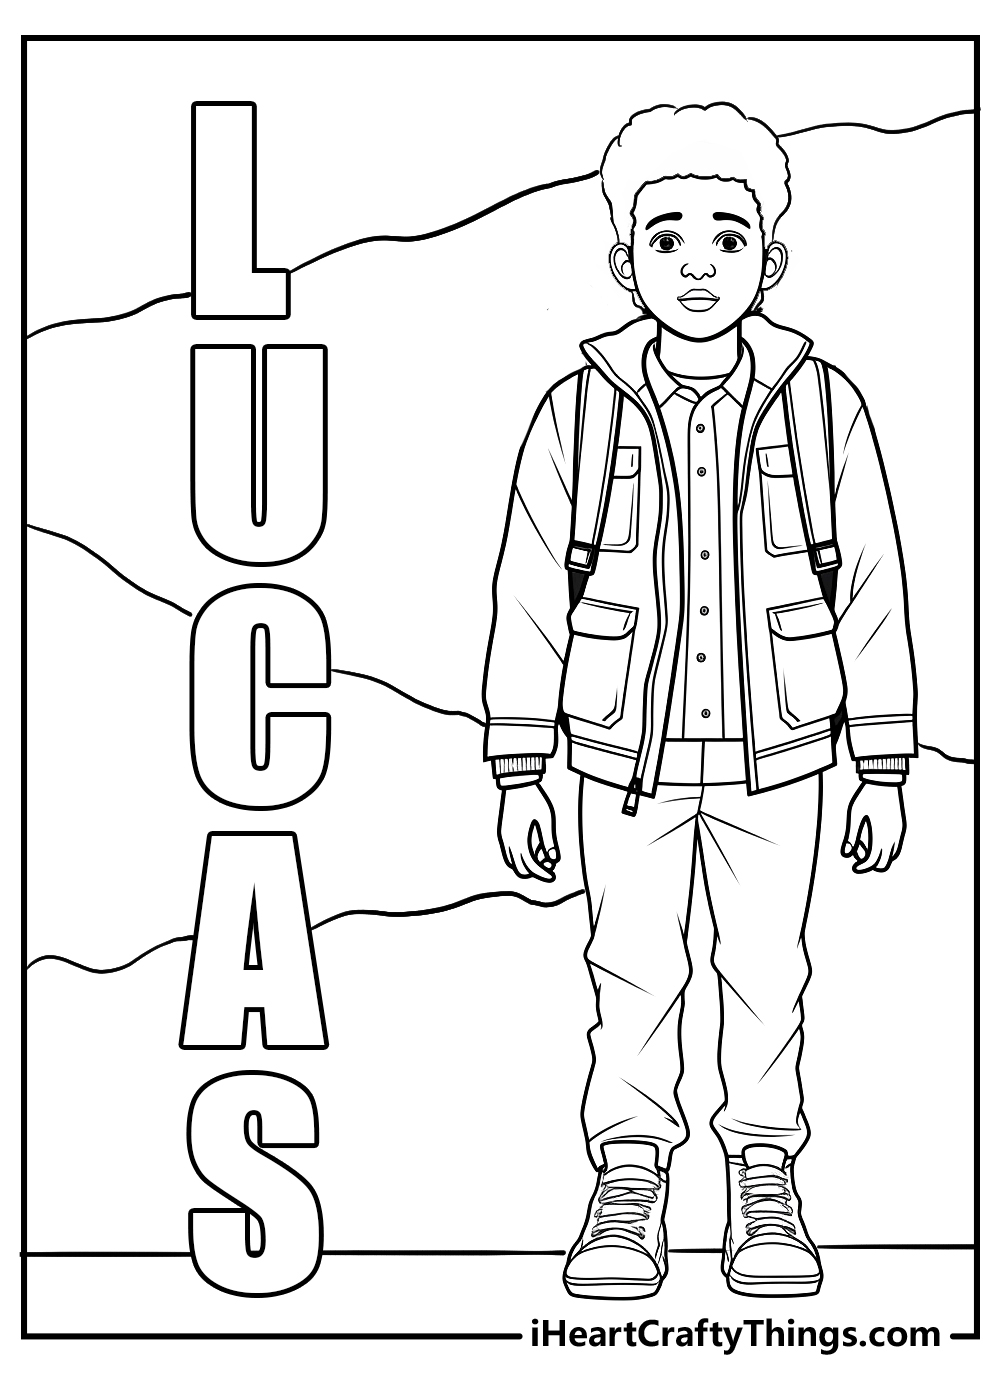 Printable stranger things coloring pages updated